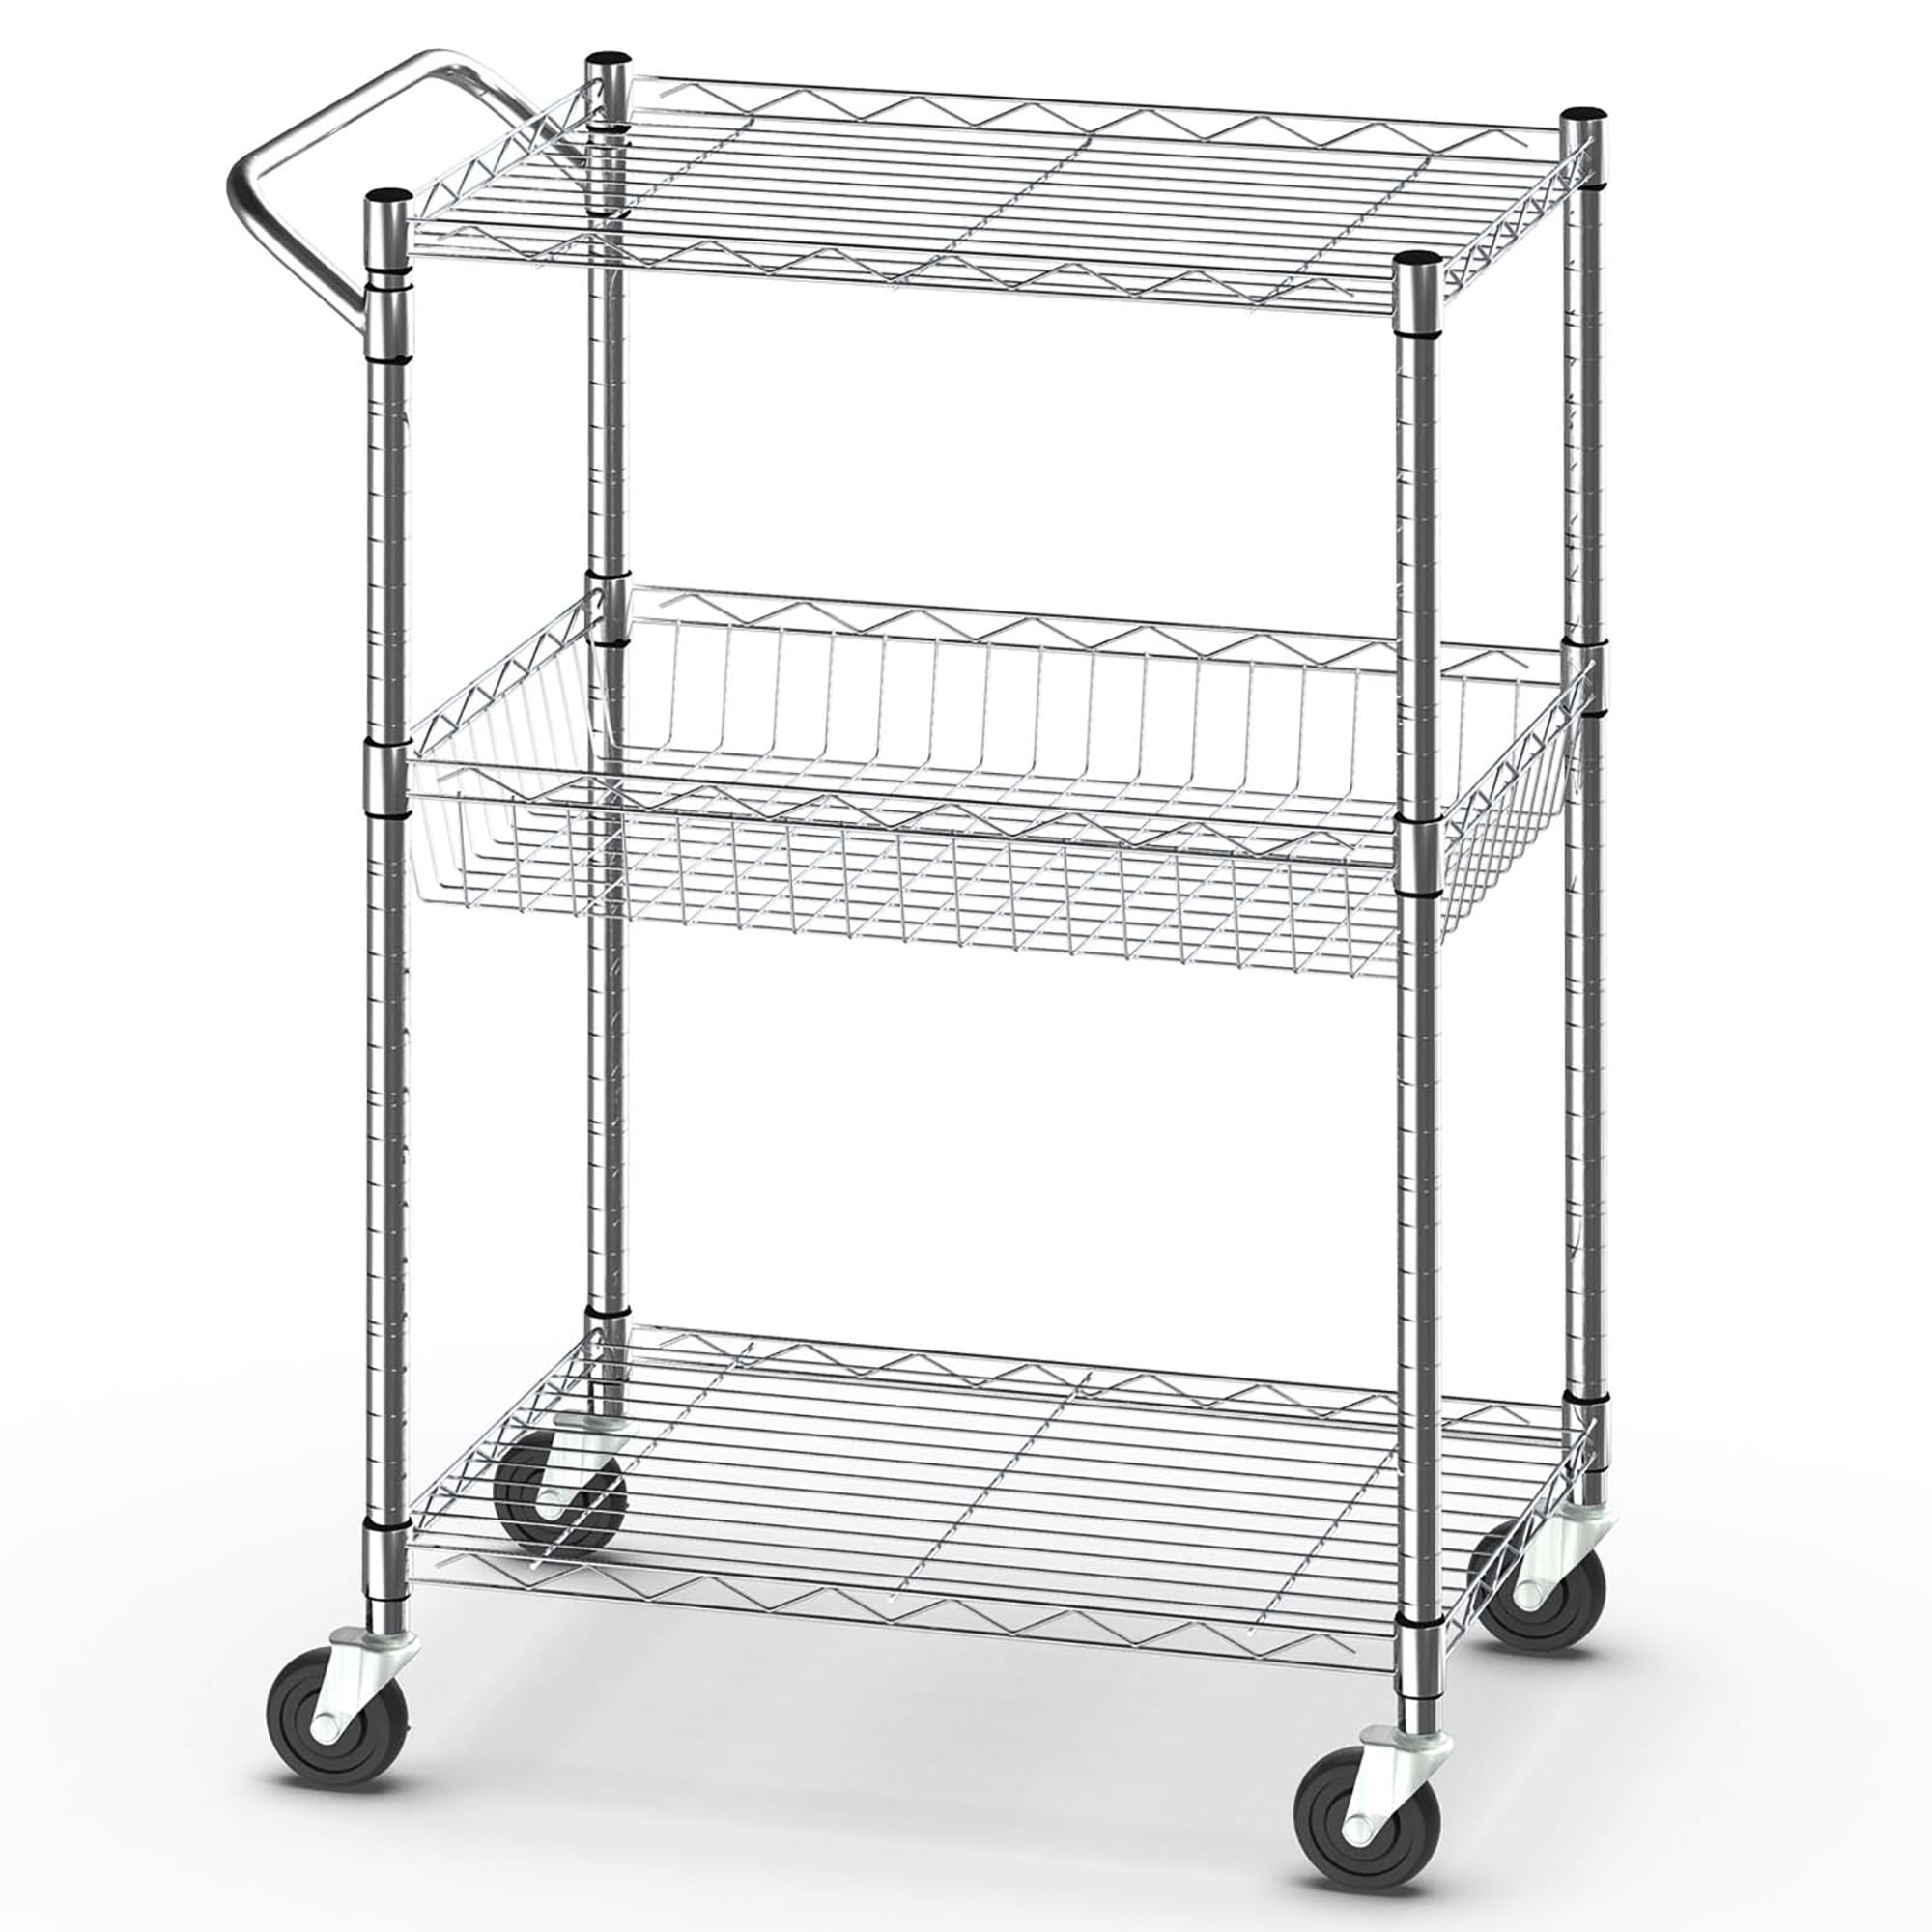 Metal Bookshelv. Childrens Shelters Garage Nursing and Care Homes 14 x 36 NSF Chrome Wire 5-Shelf Kit with 64 Posts Commercial Hospital Perfect for Home